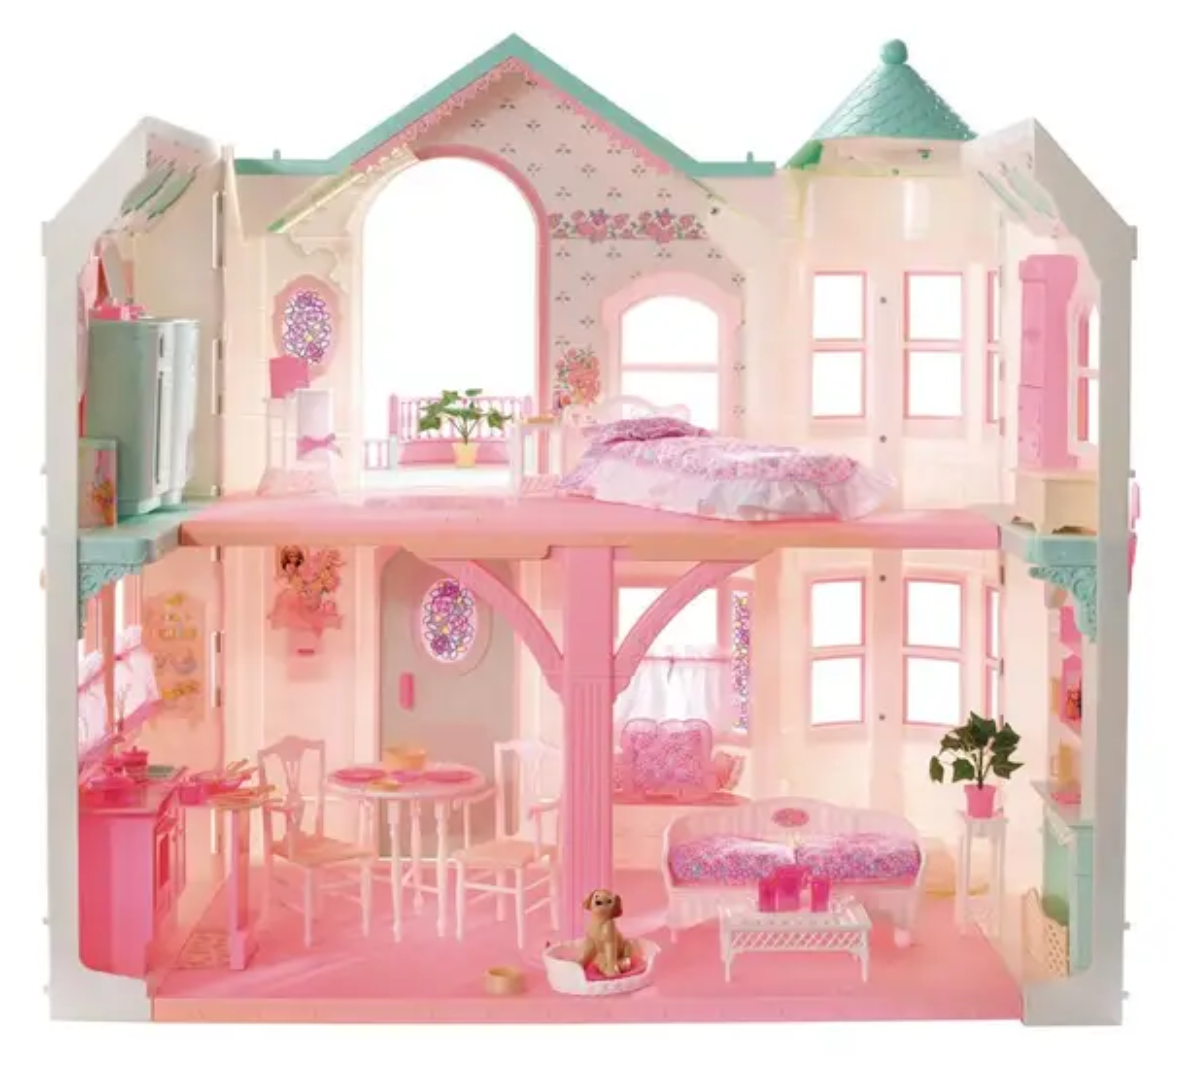 Barbie and Ken's Deluxe Dreamhouse